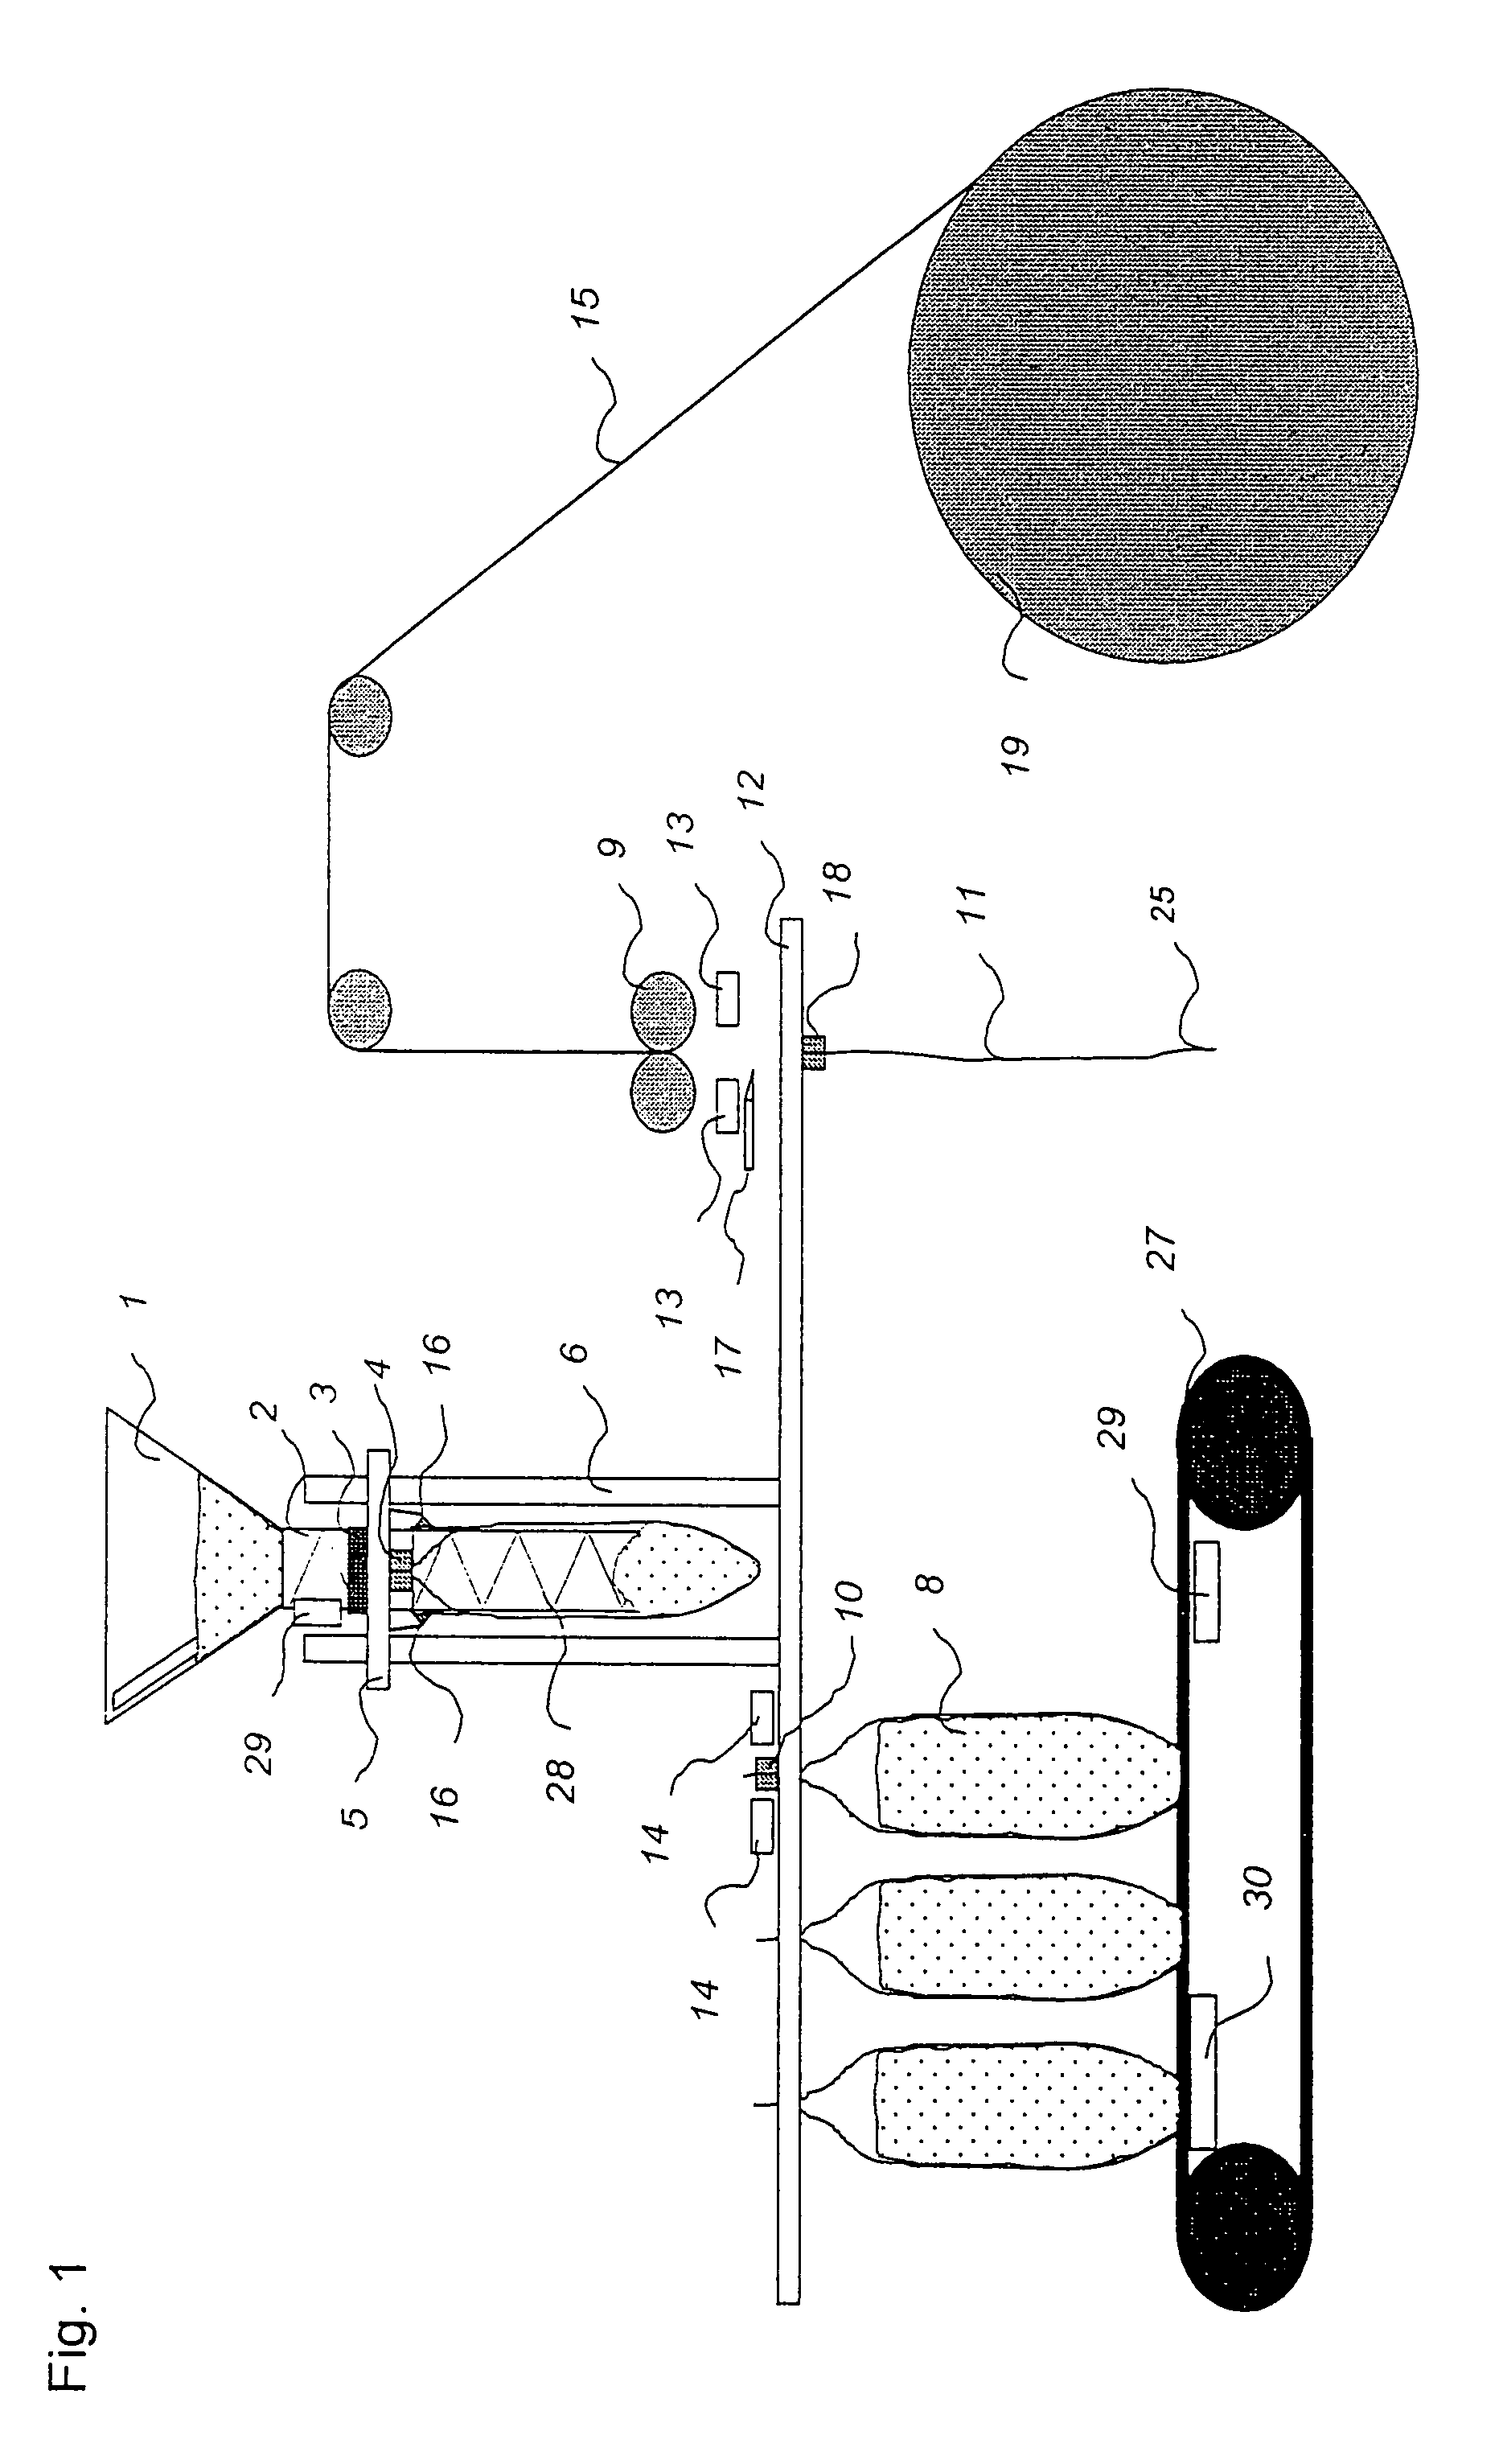 Machine for forming, filling and closing bags with a bag lifting device